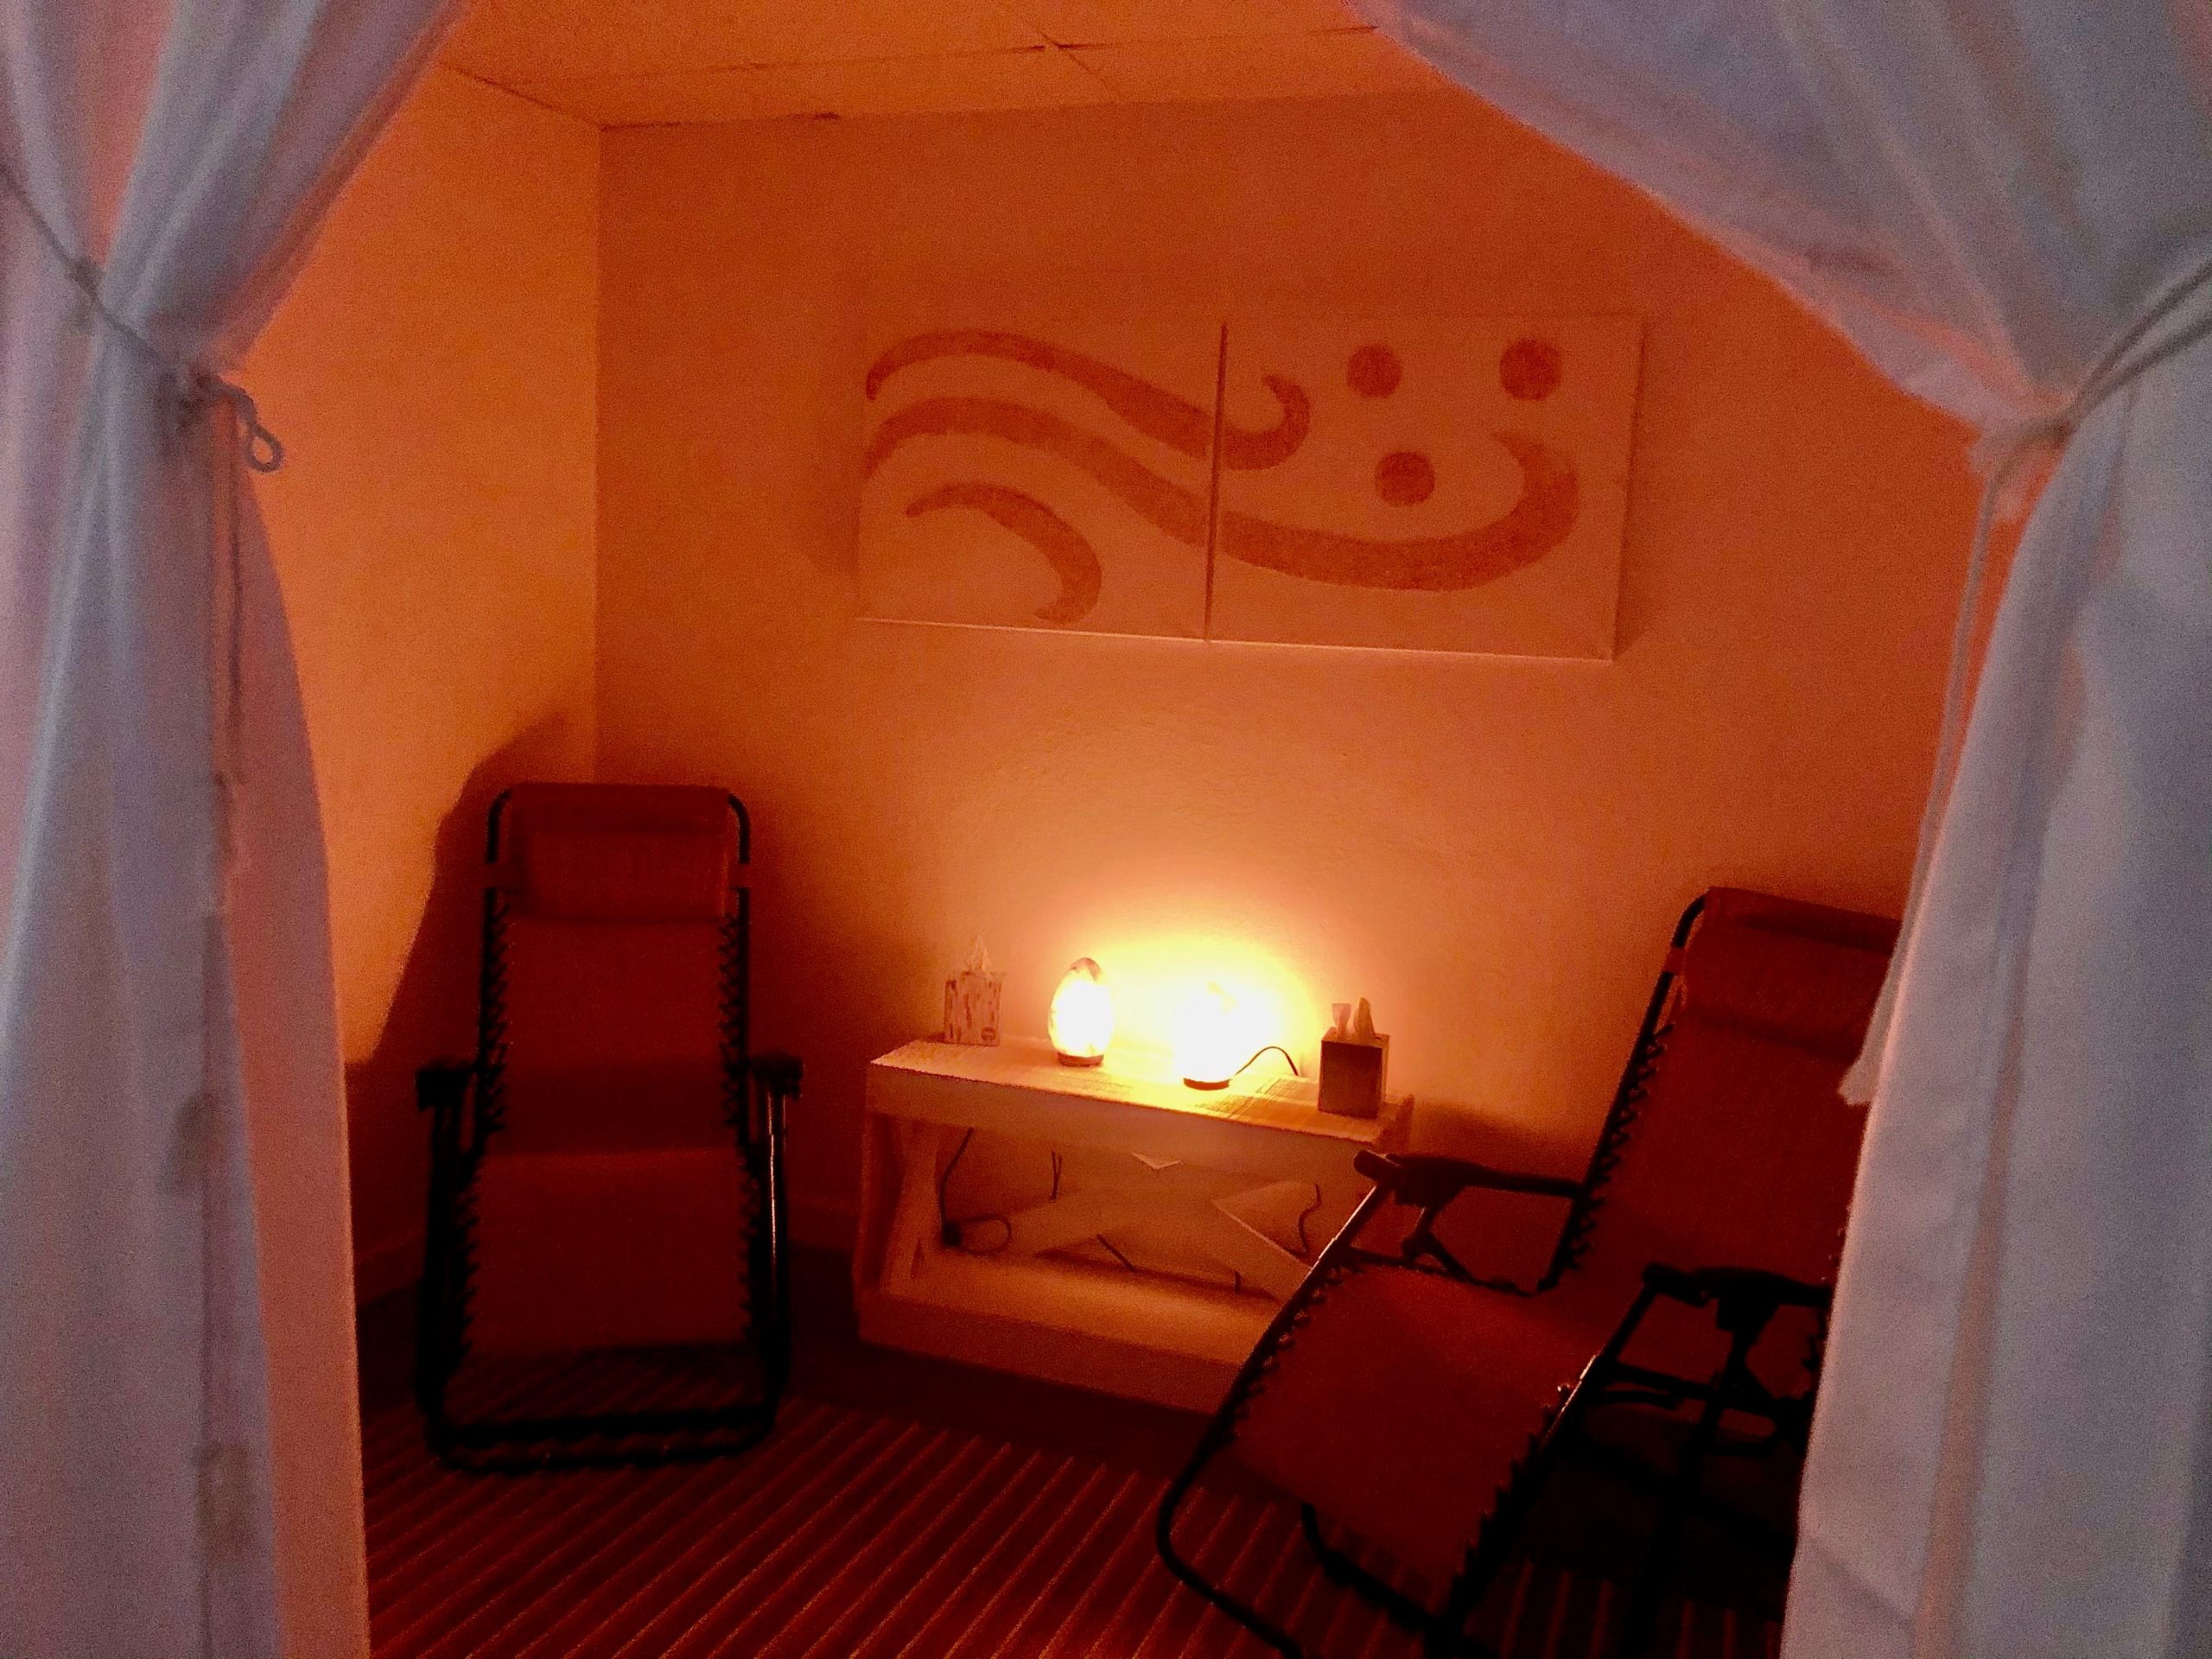 Two Red Lounge Chairs With A White Table Between With Two Himalayan Salt Lamps.